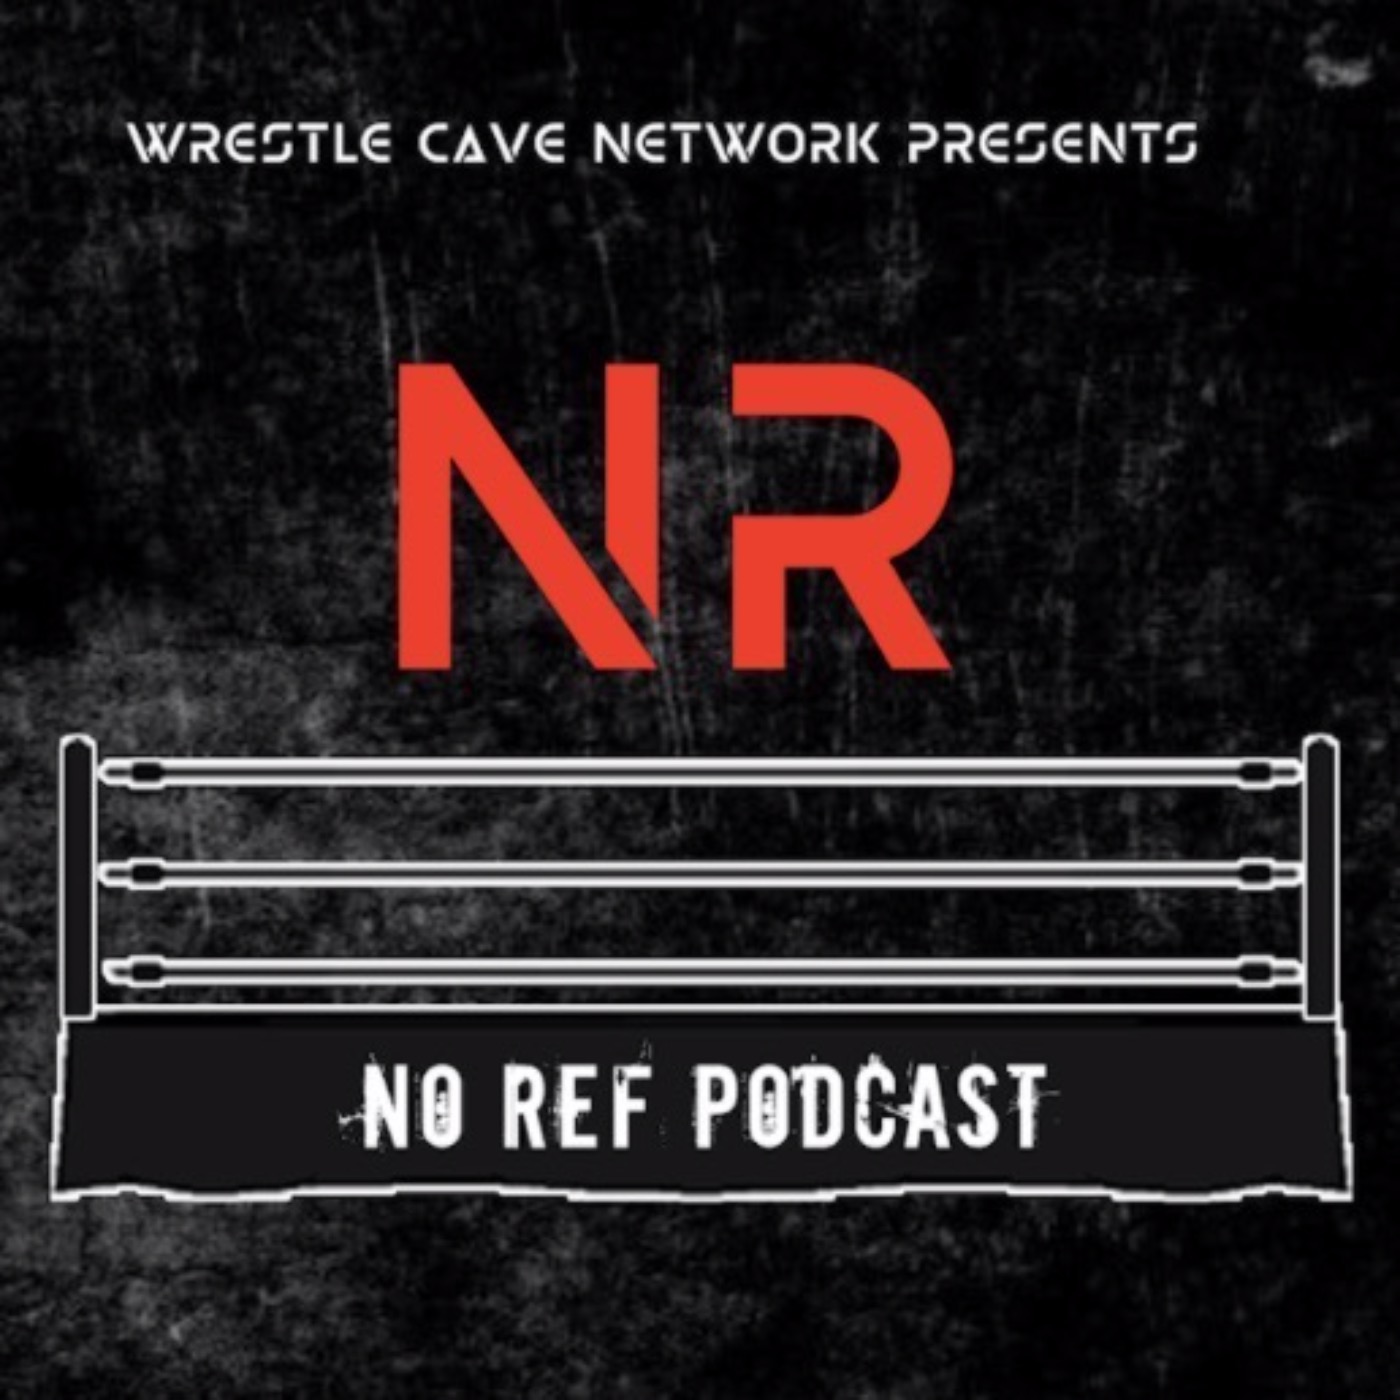 No Ref Podcast: Episode 53 "Just My Thoughts"